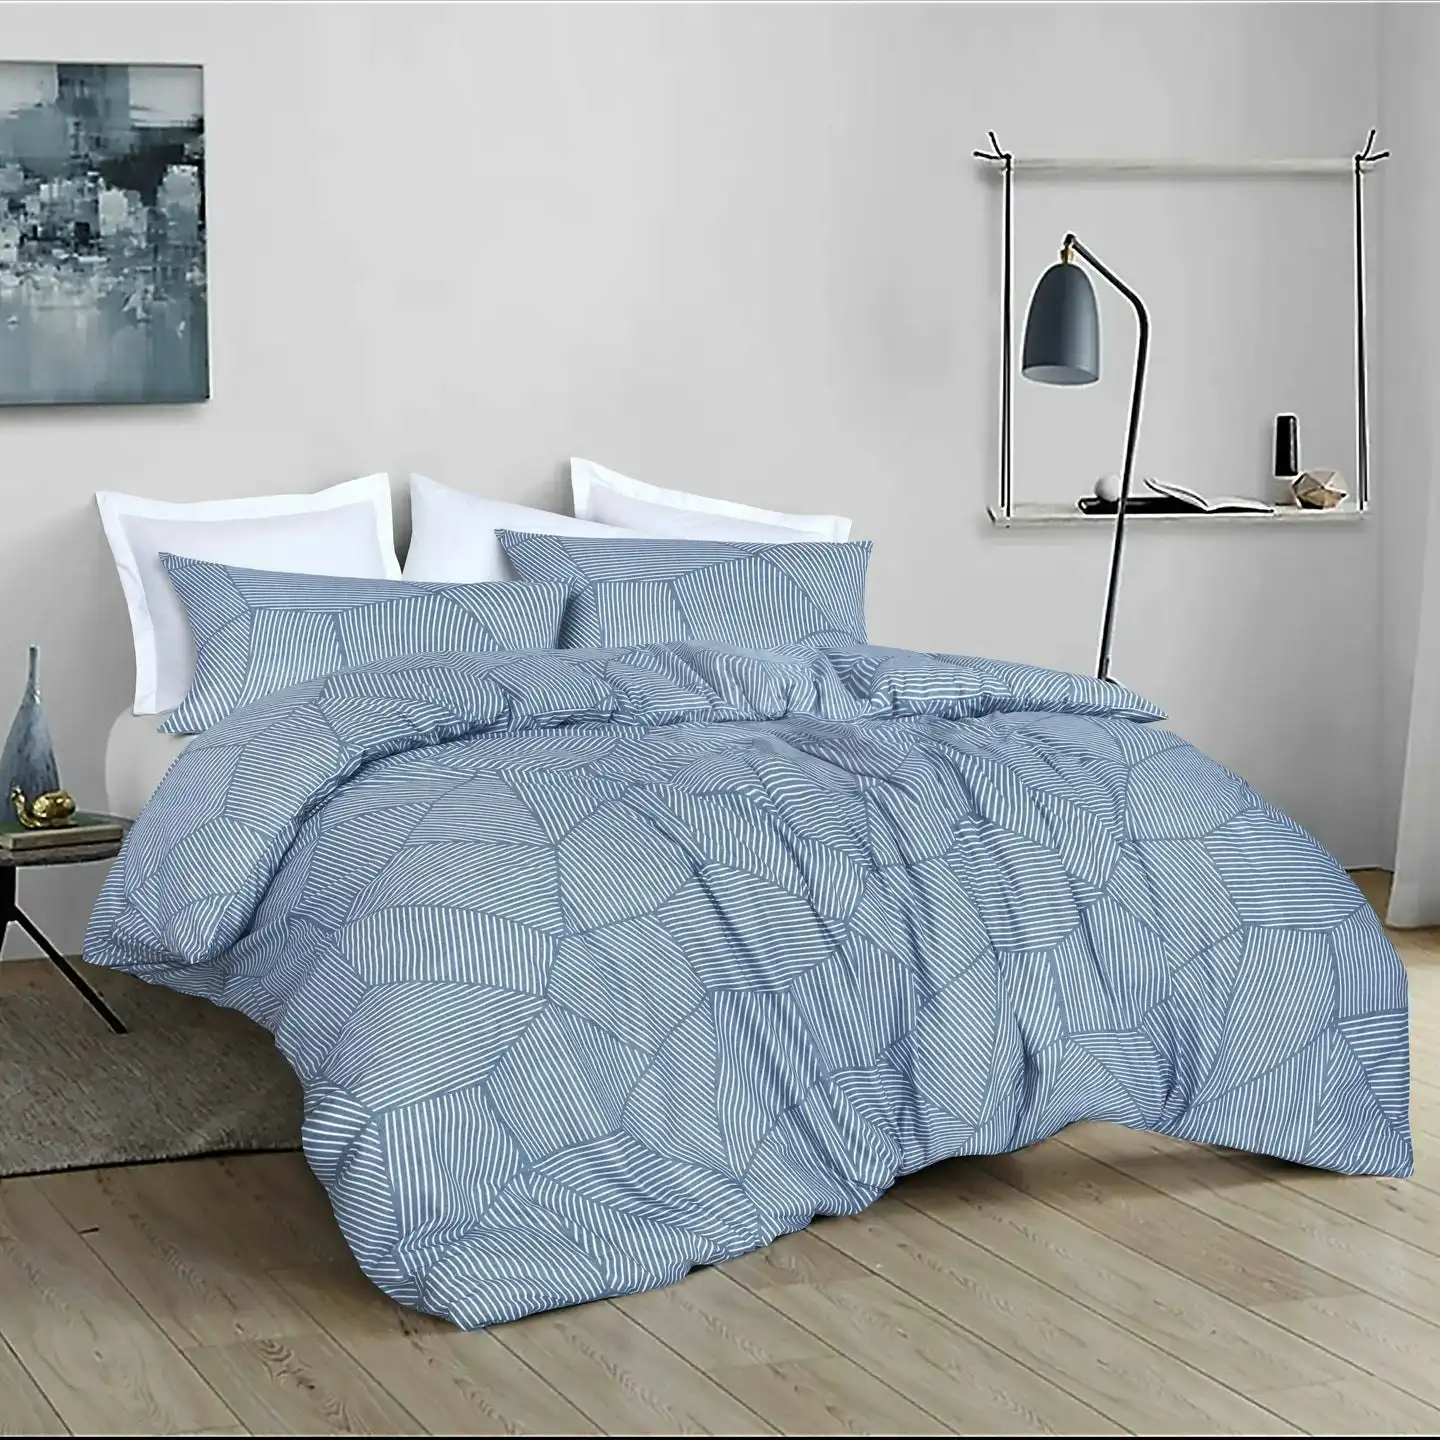 Amsons Pure Cotton Quilt Cover Set With Extra Standard Pillowcases - Ariana Denim